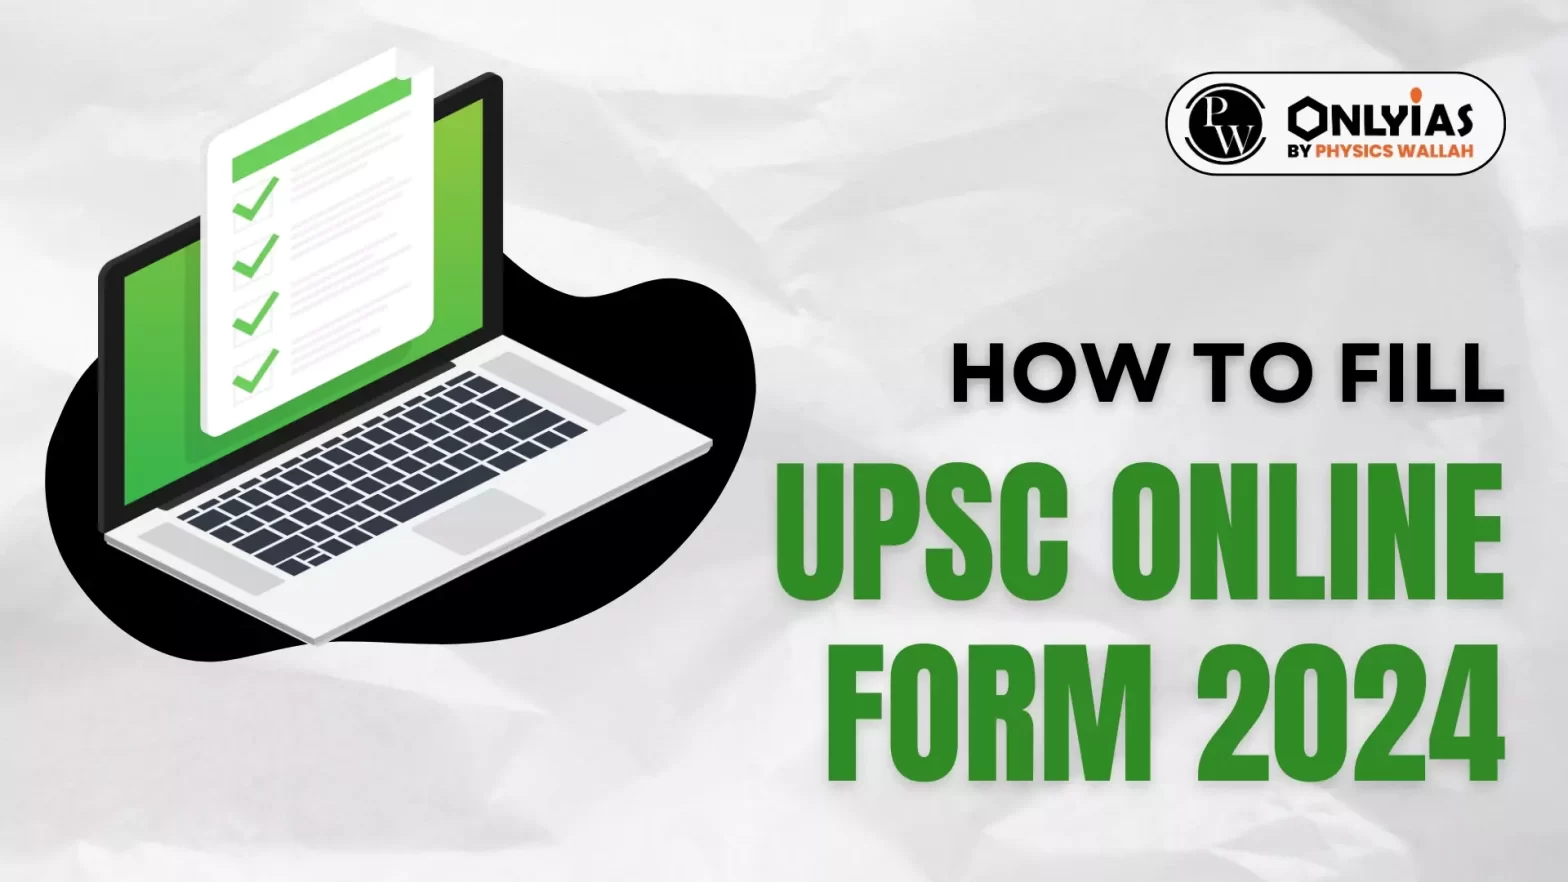 How to Fill UPSC Online Form 2024